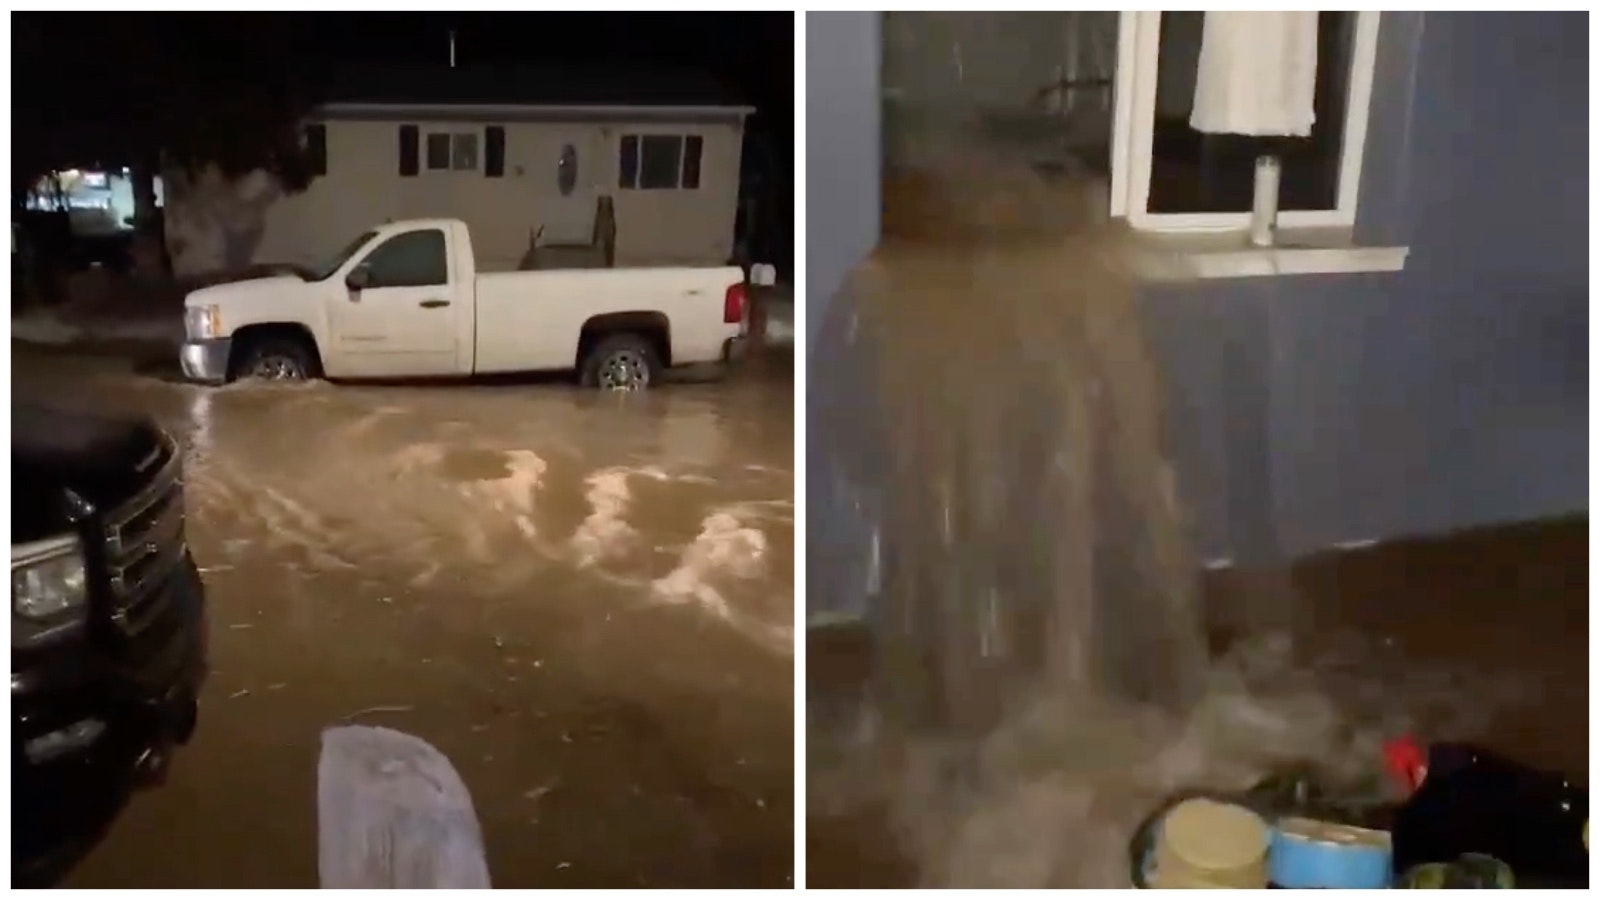 A 12-inch water main breaking caused devastating flooding of a Cheyenne neighborhood with water running down the streets and gushing into this basement, right.